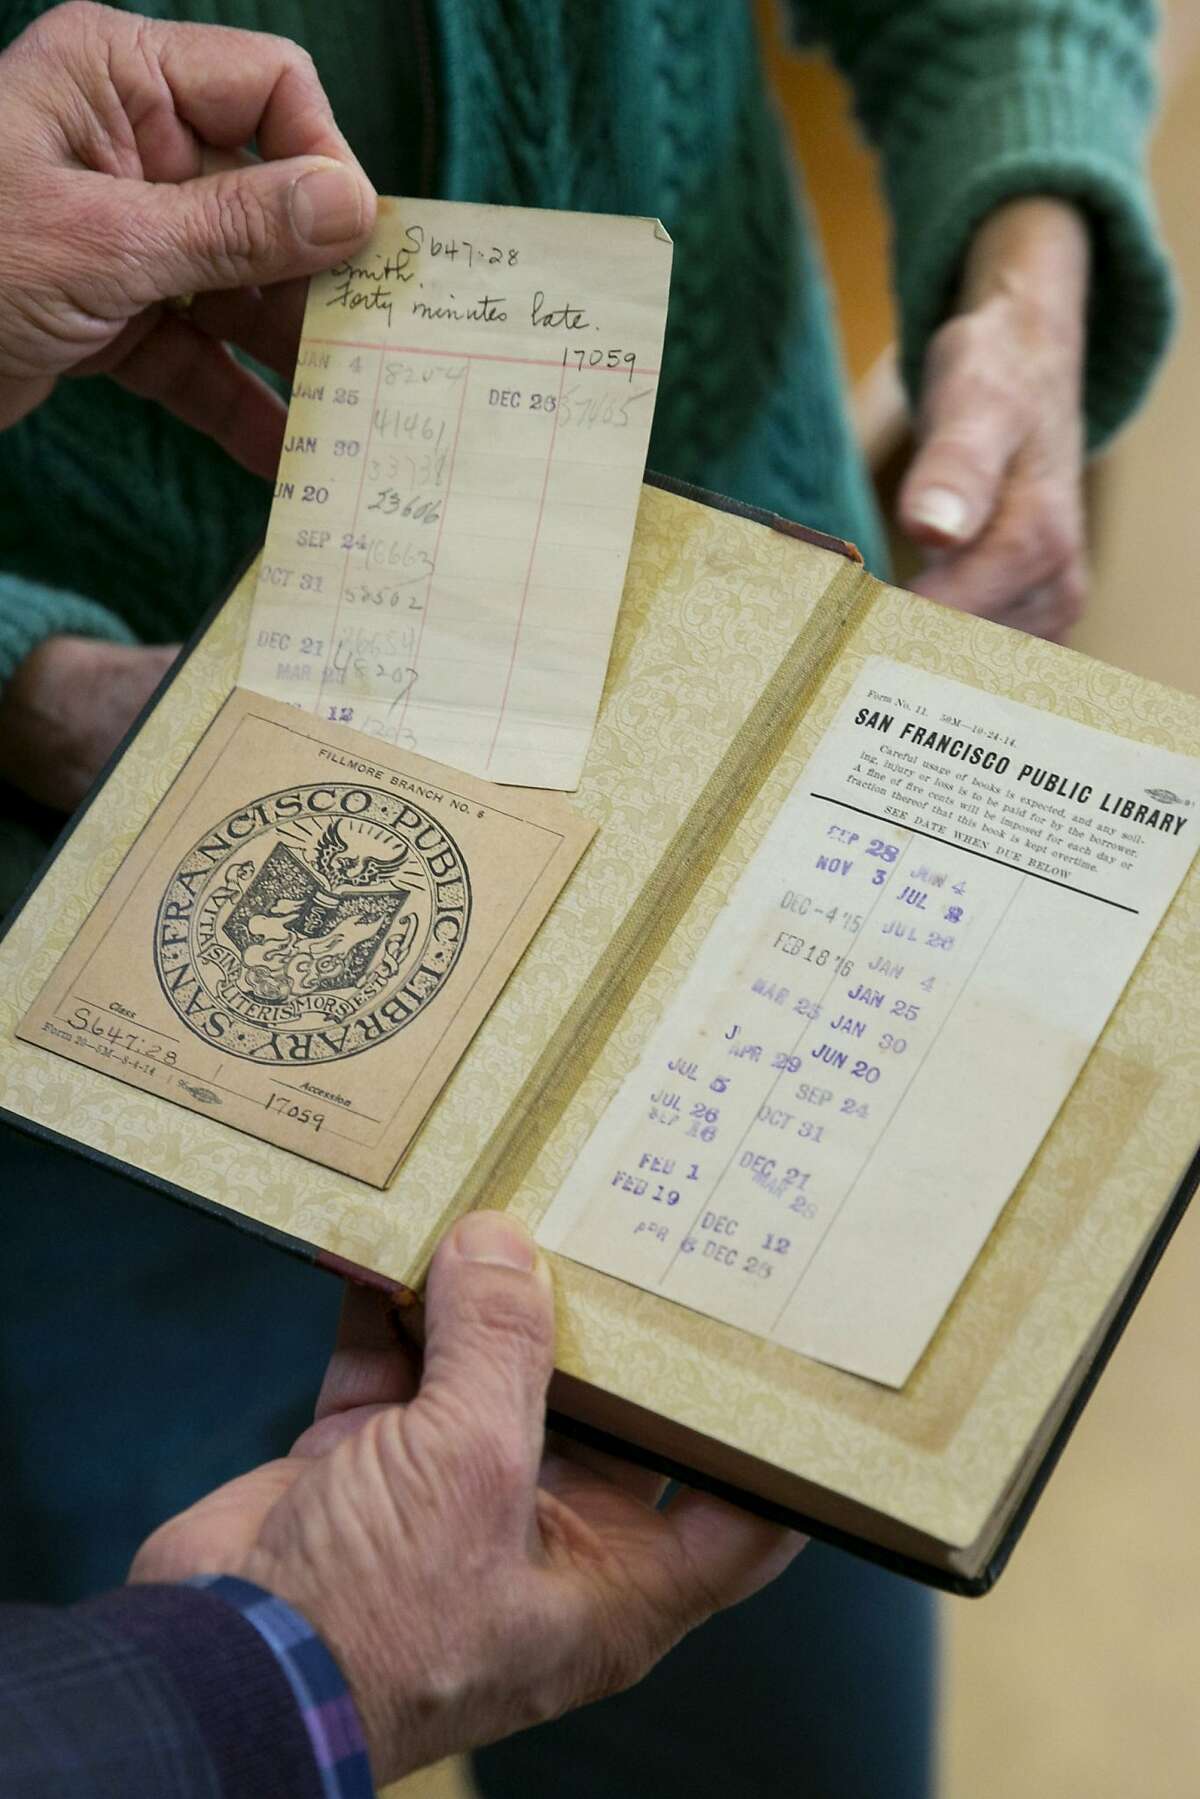 City Librarian Luis Herrera examines the book "Forty Minutes Late" at the San Francisco Public Library Park Branch on Friday, Jan. 13, 2017 in San Francisco, Calif. It was returned today during the library's Fine Forgiveness Program. The book has a 1917 due-date stamp.